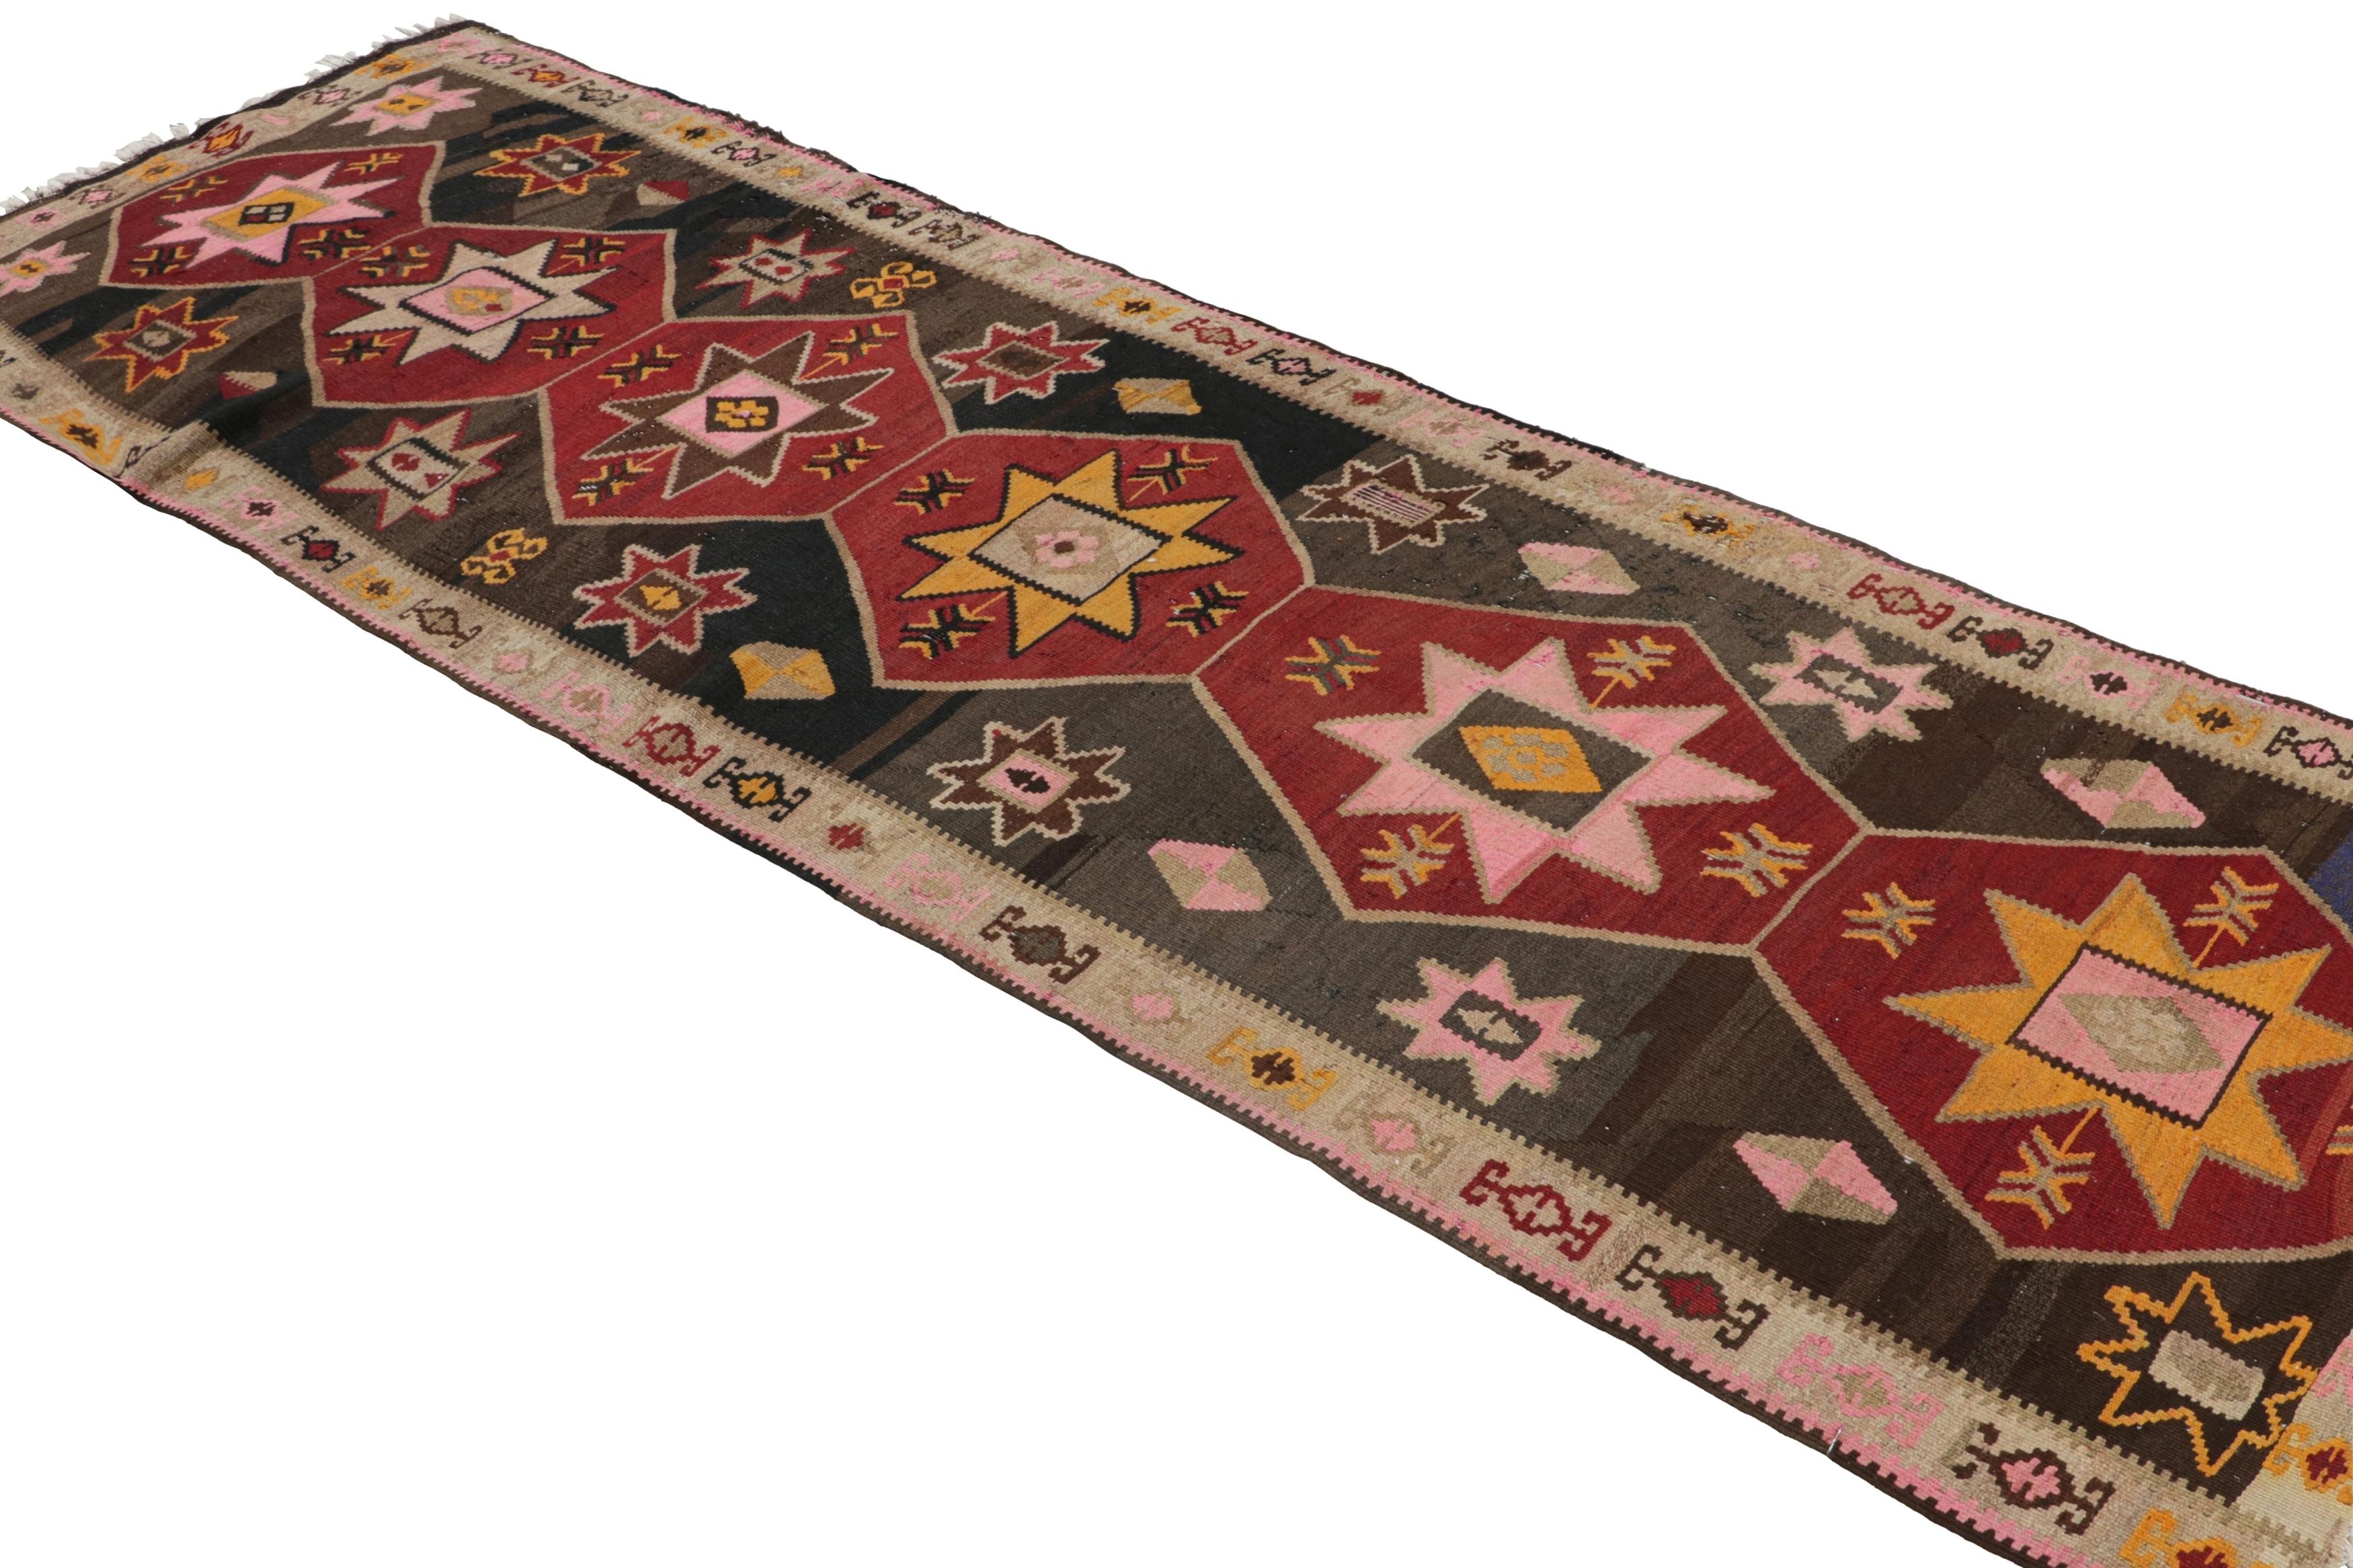 Hand-Woven Handwoven Antique Kilim Rug in Beige-Brown Red Medallion Pattern by Rug & Kilim For Sale